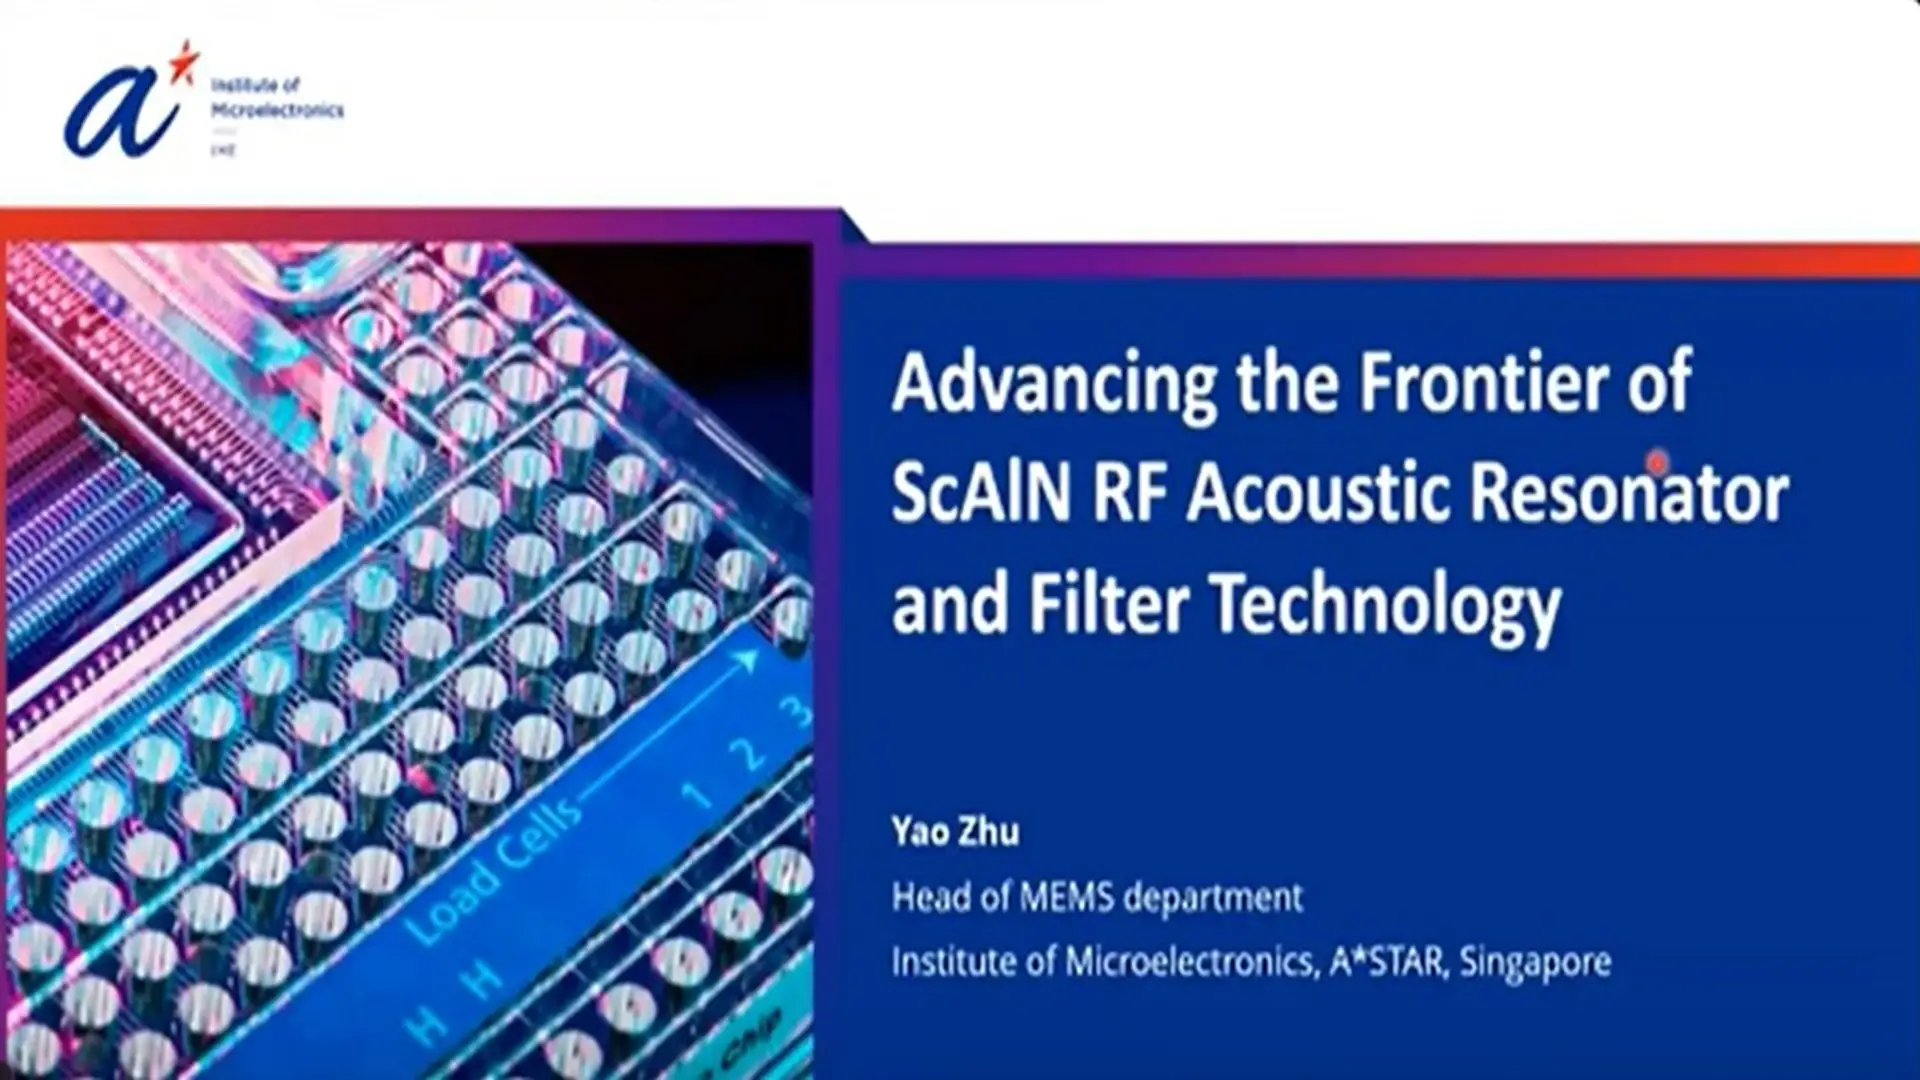 Advancing the Frontier of ScAIN RF Acoustic Resonator and Filter Technology